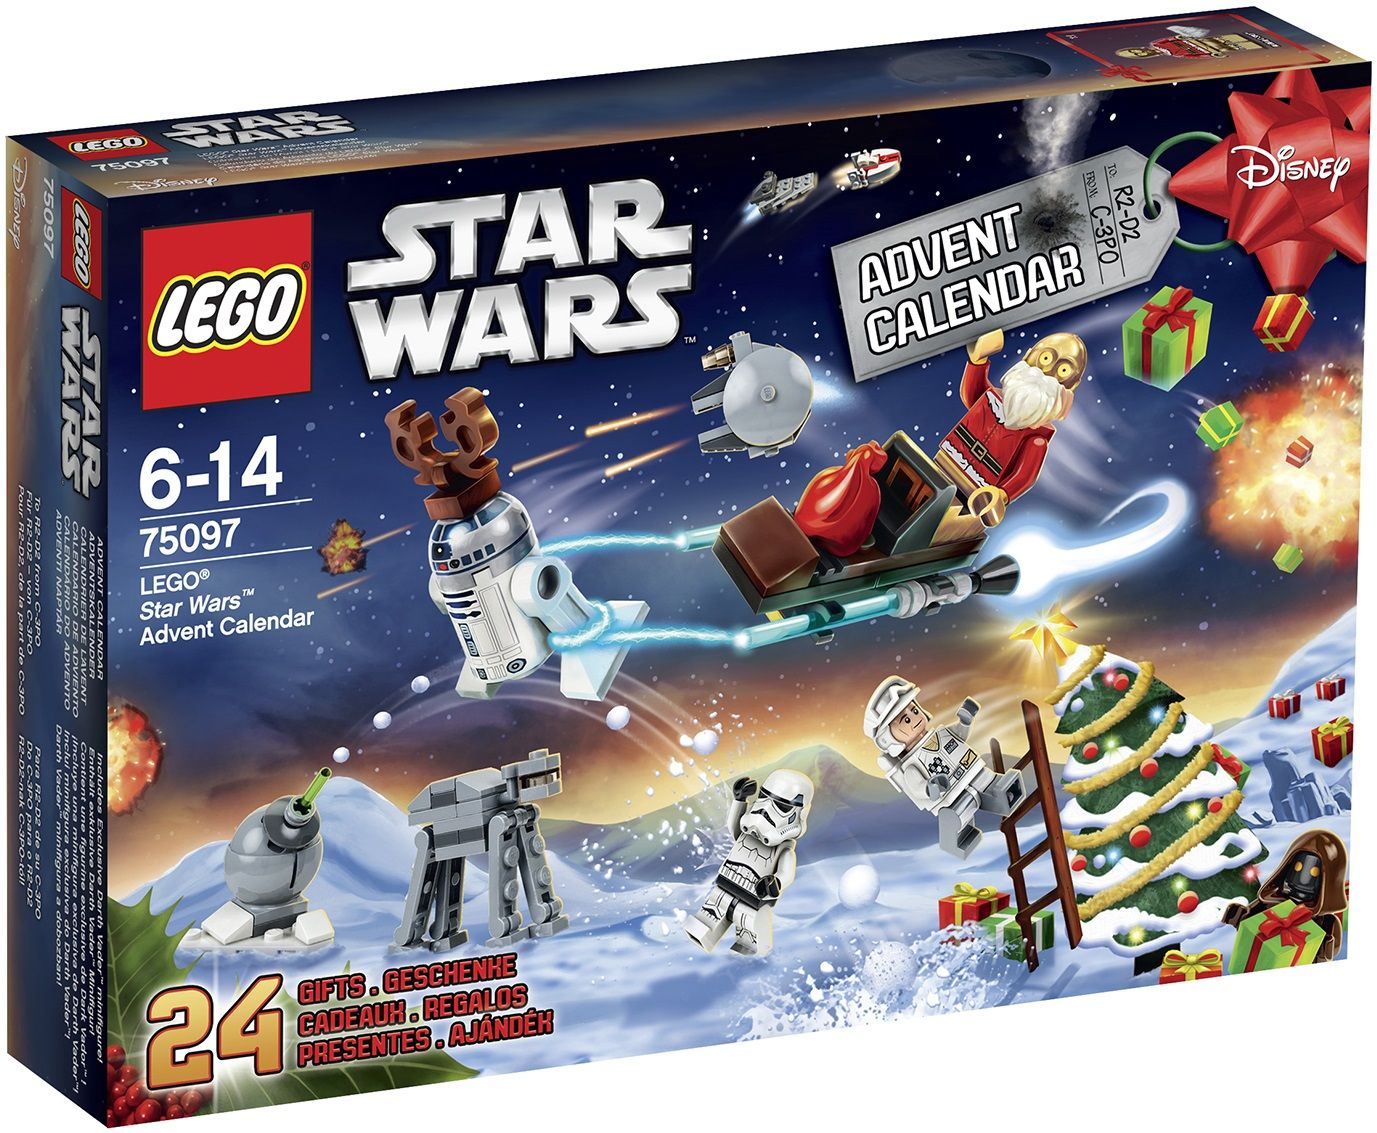 Upcoming LEGO Star Wars The Force Awakens 2015 Sets Geek Culture